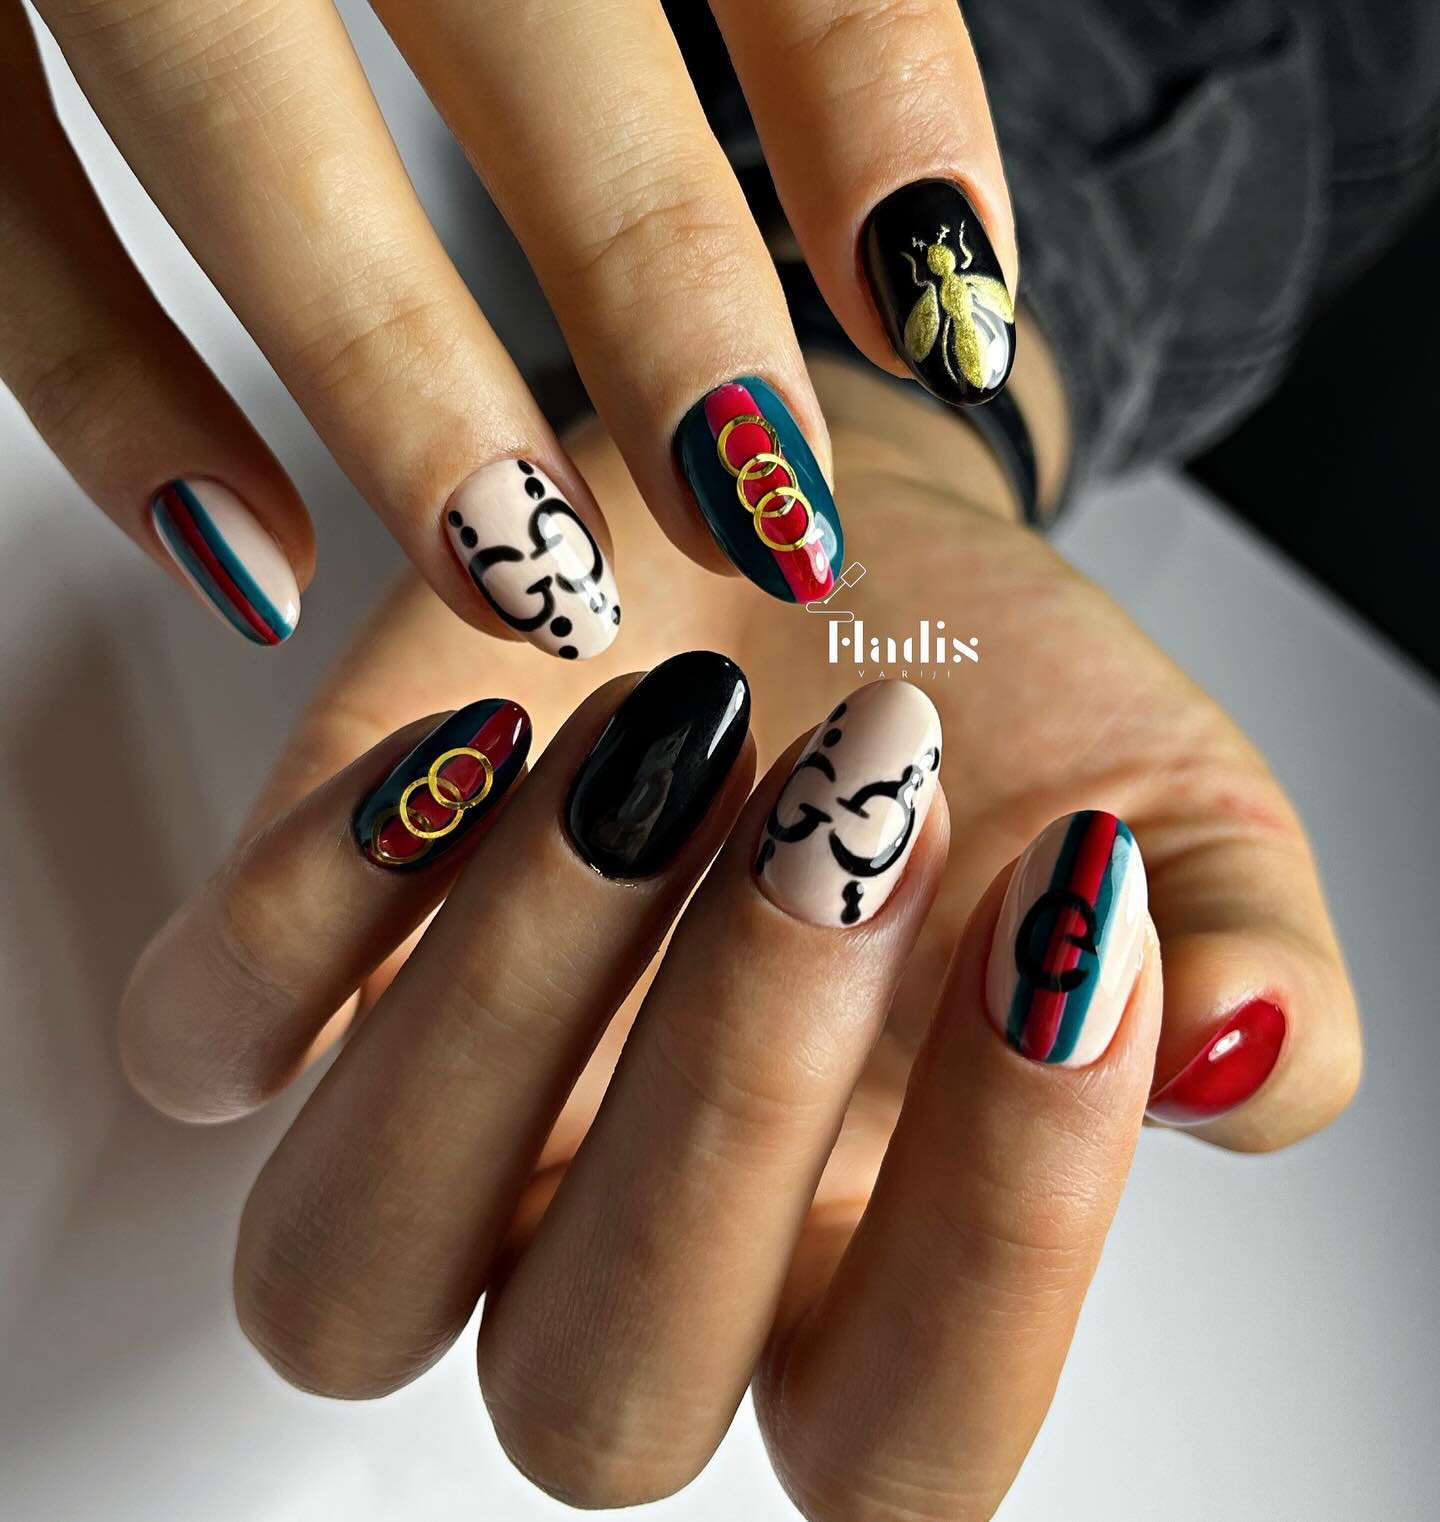 Artistic Almond Nails with Music and Nature Motifs